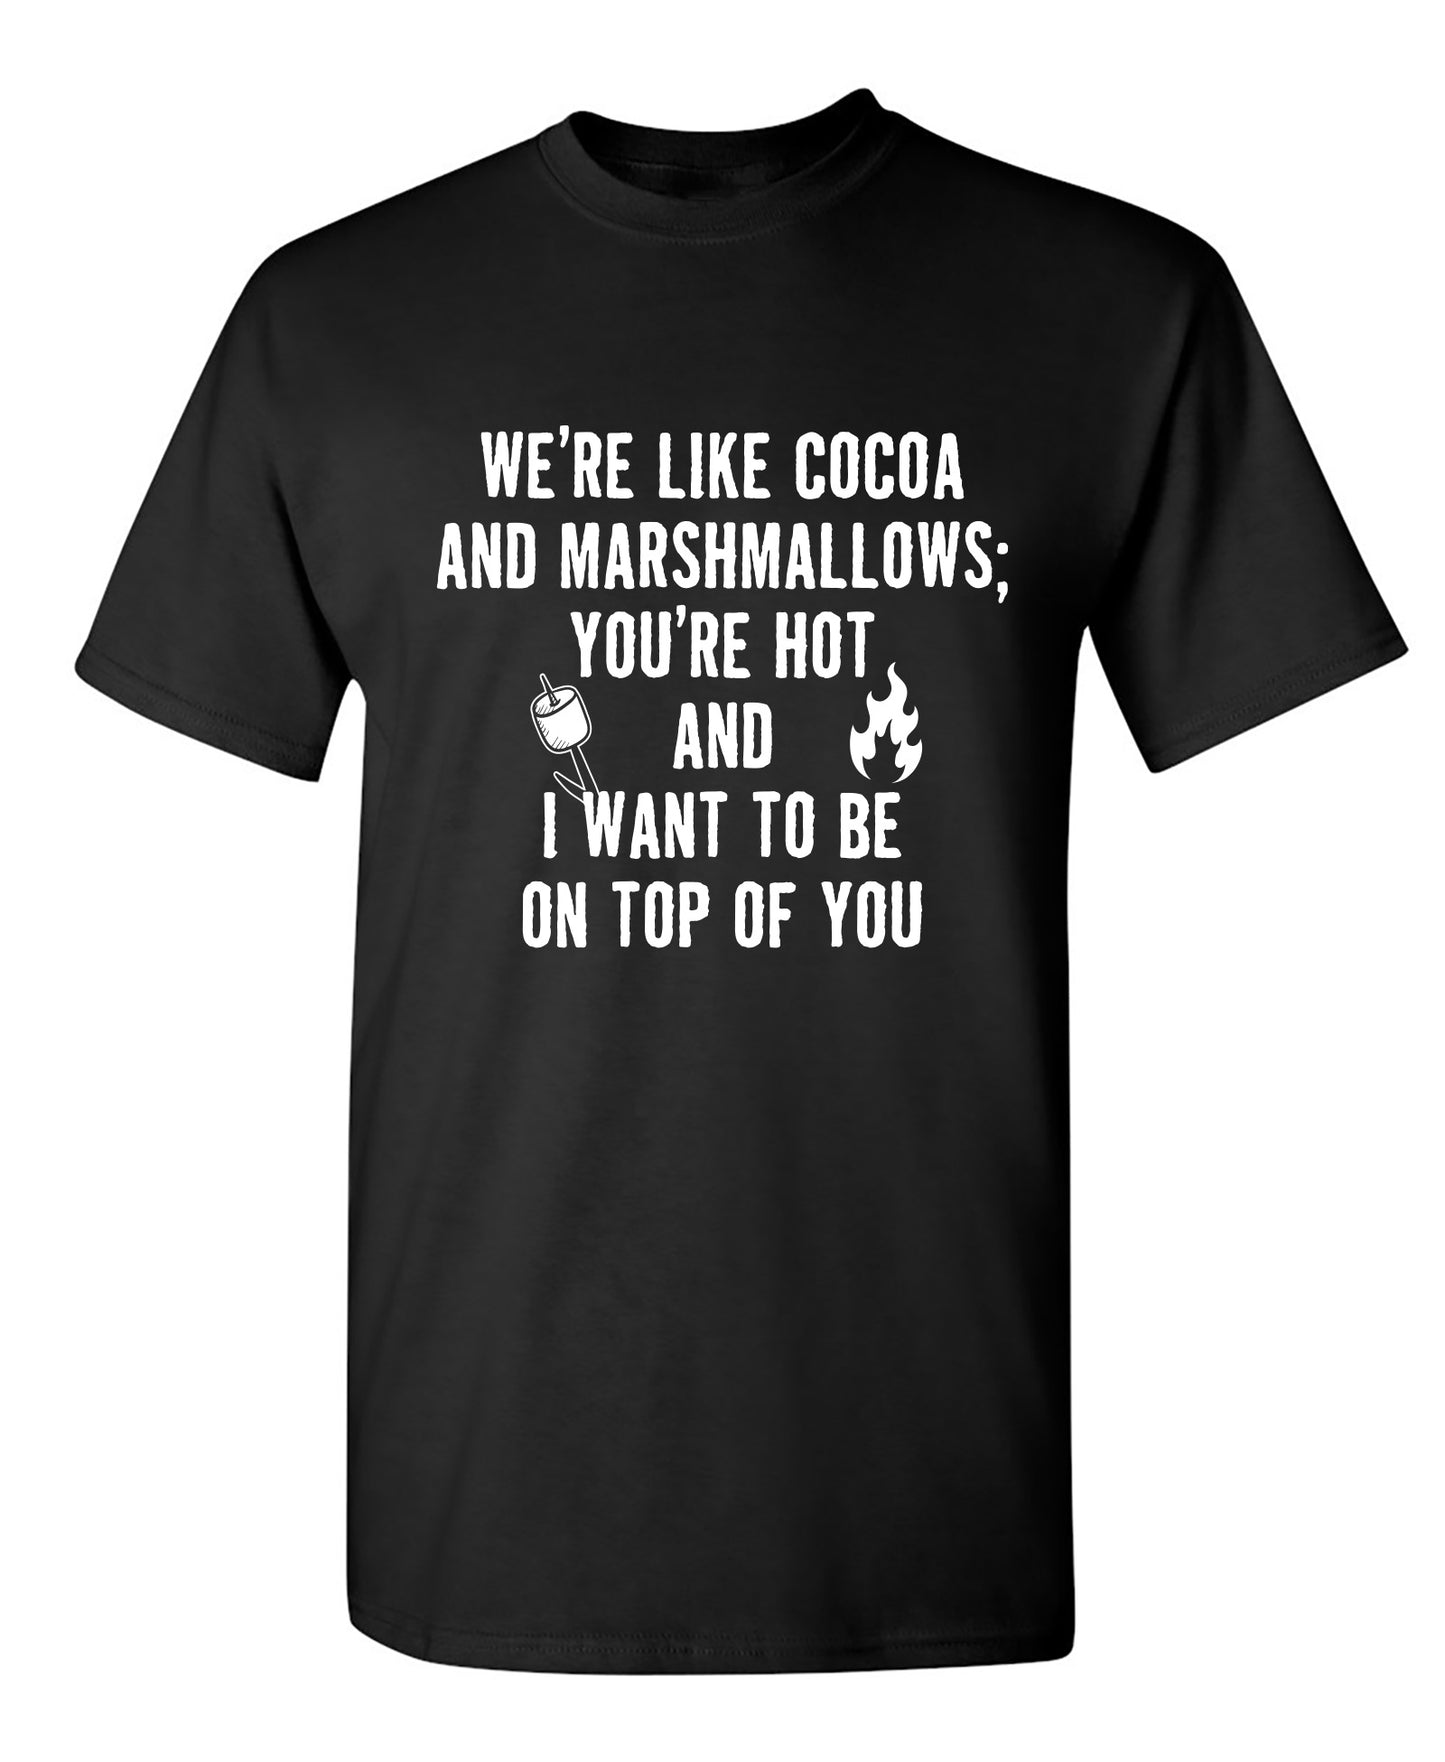 We're Like Cocoa And Marshmellows - Funny T Shirts & Graphic Tees